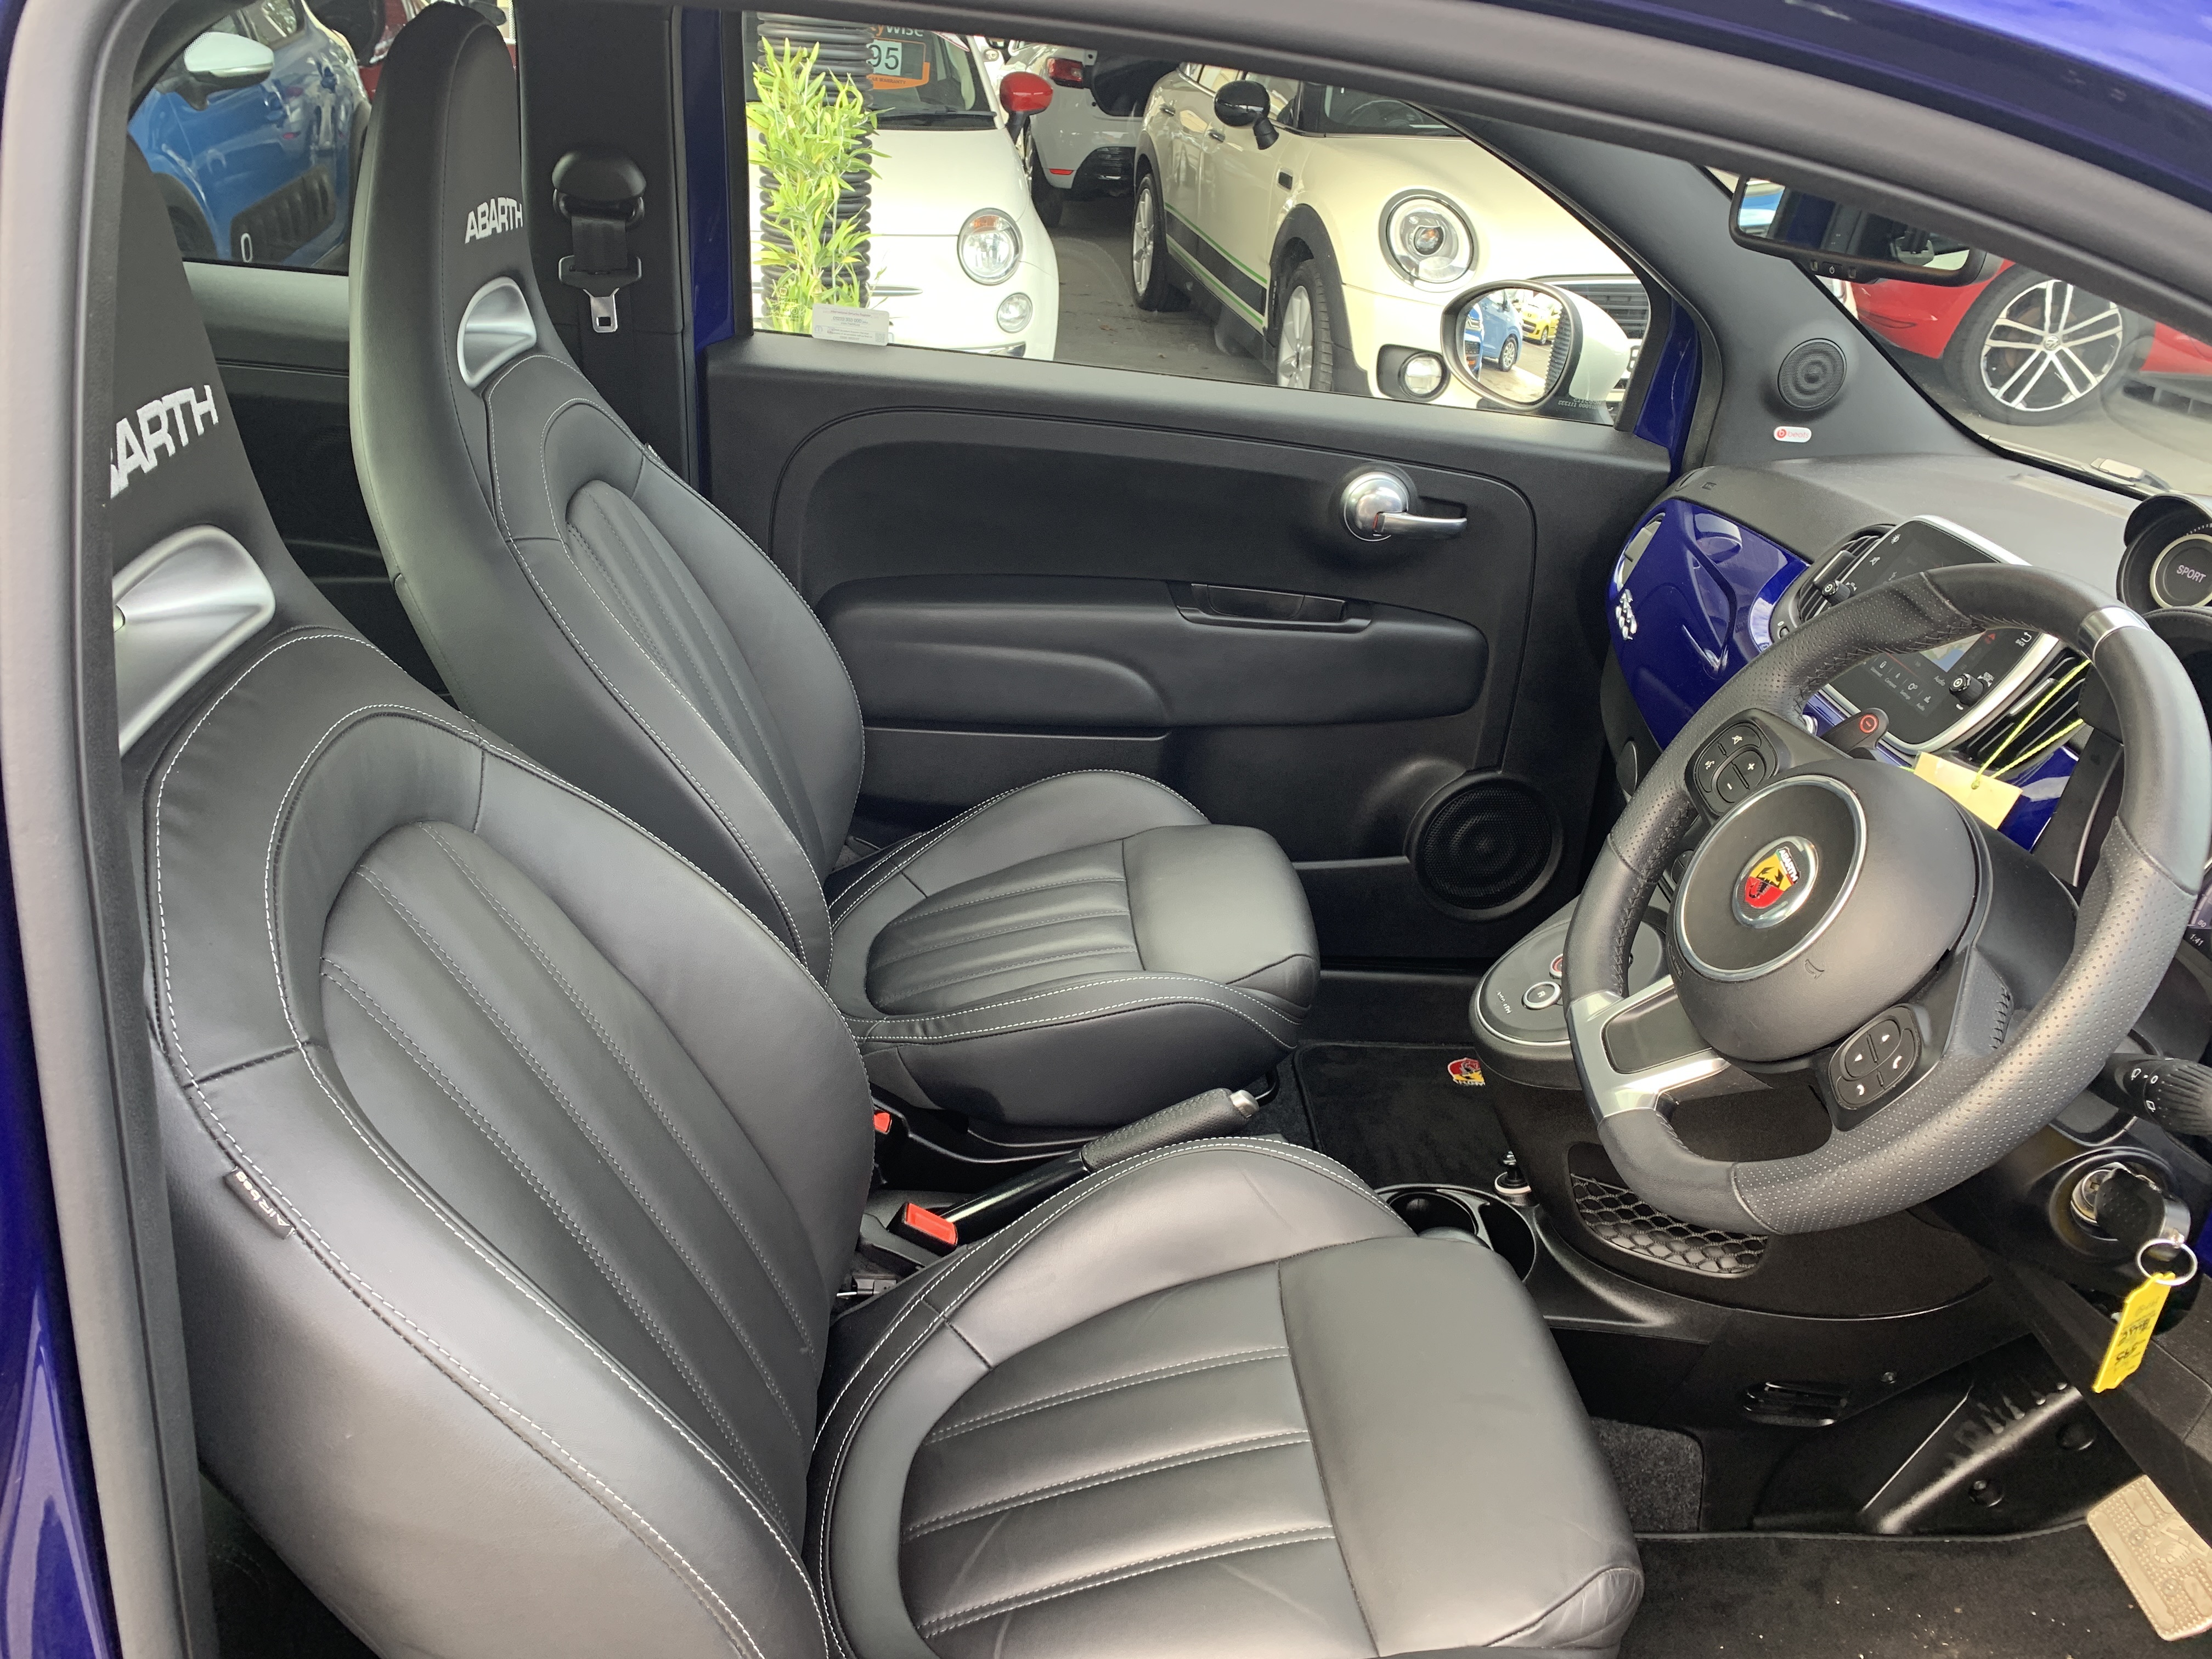 Fiat 595 ABARTH  for sale at Mike Howlin Motor Sales Pembrokeshire